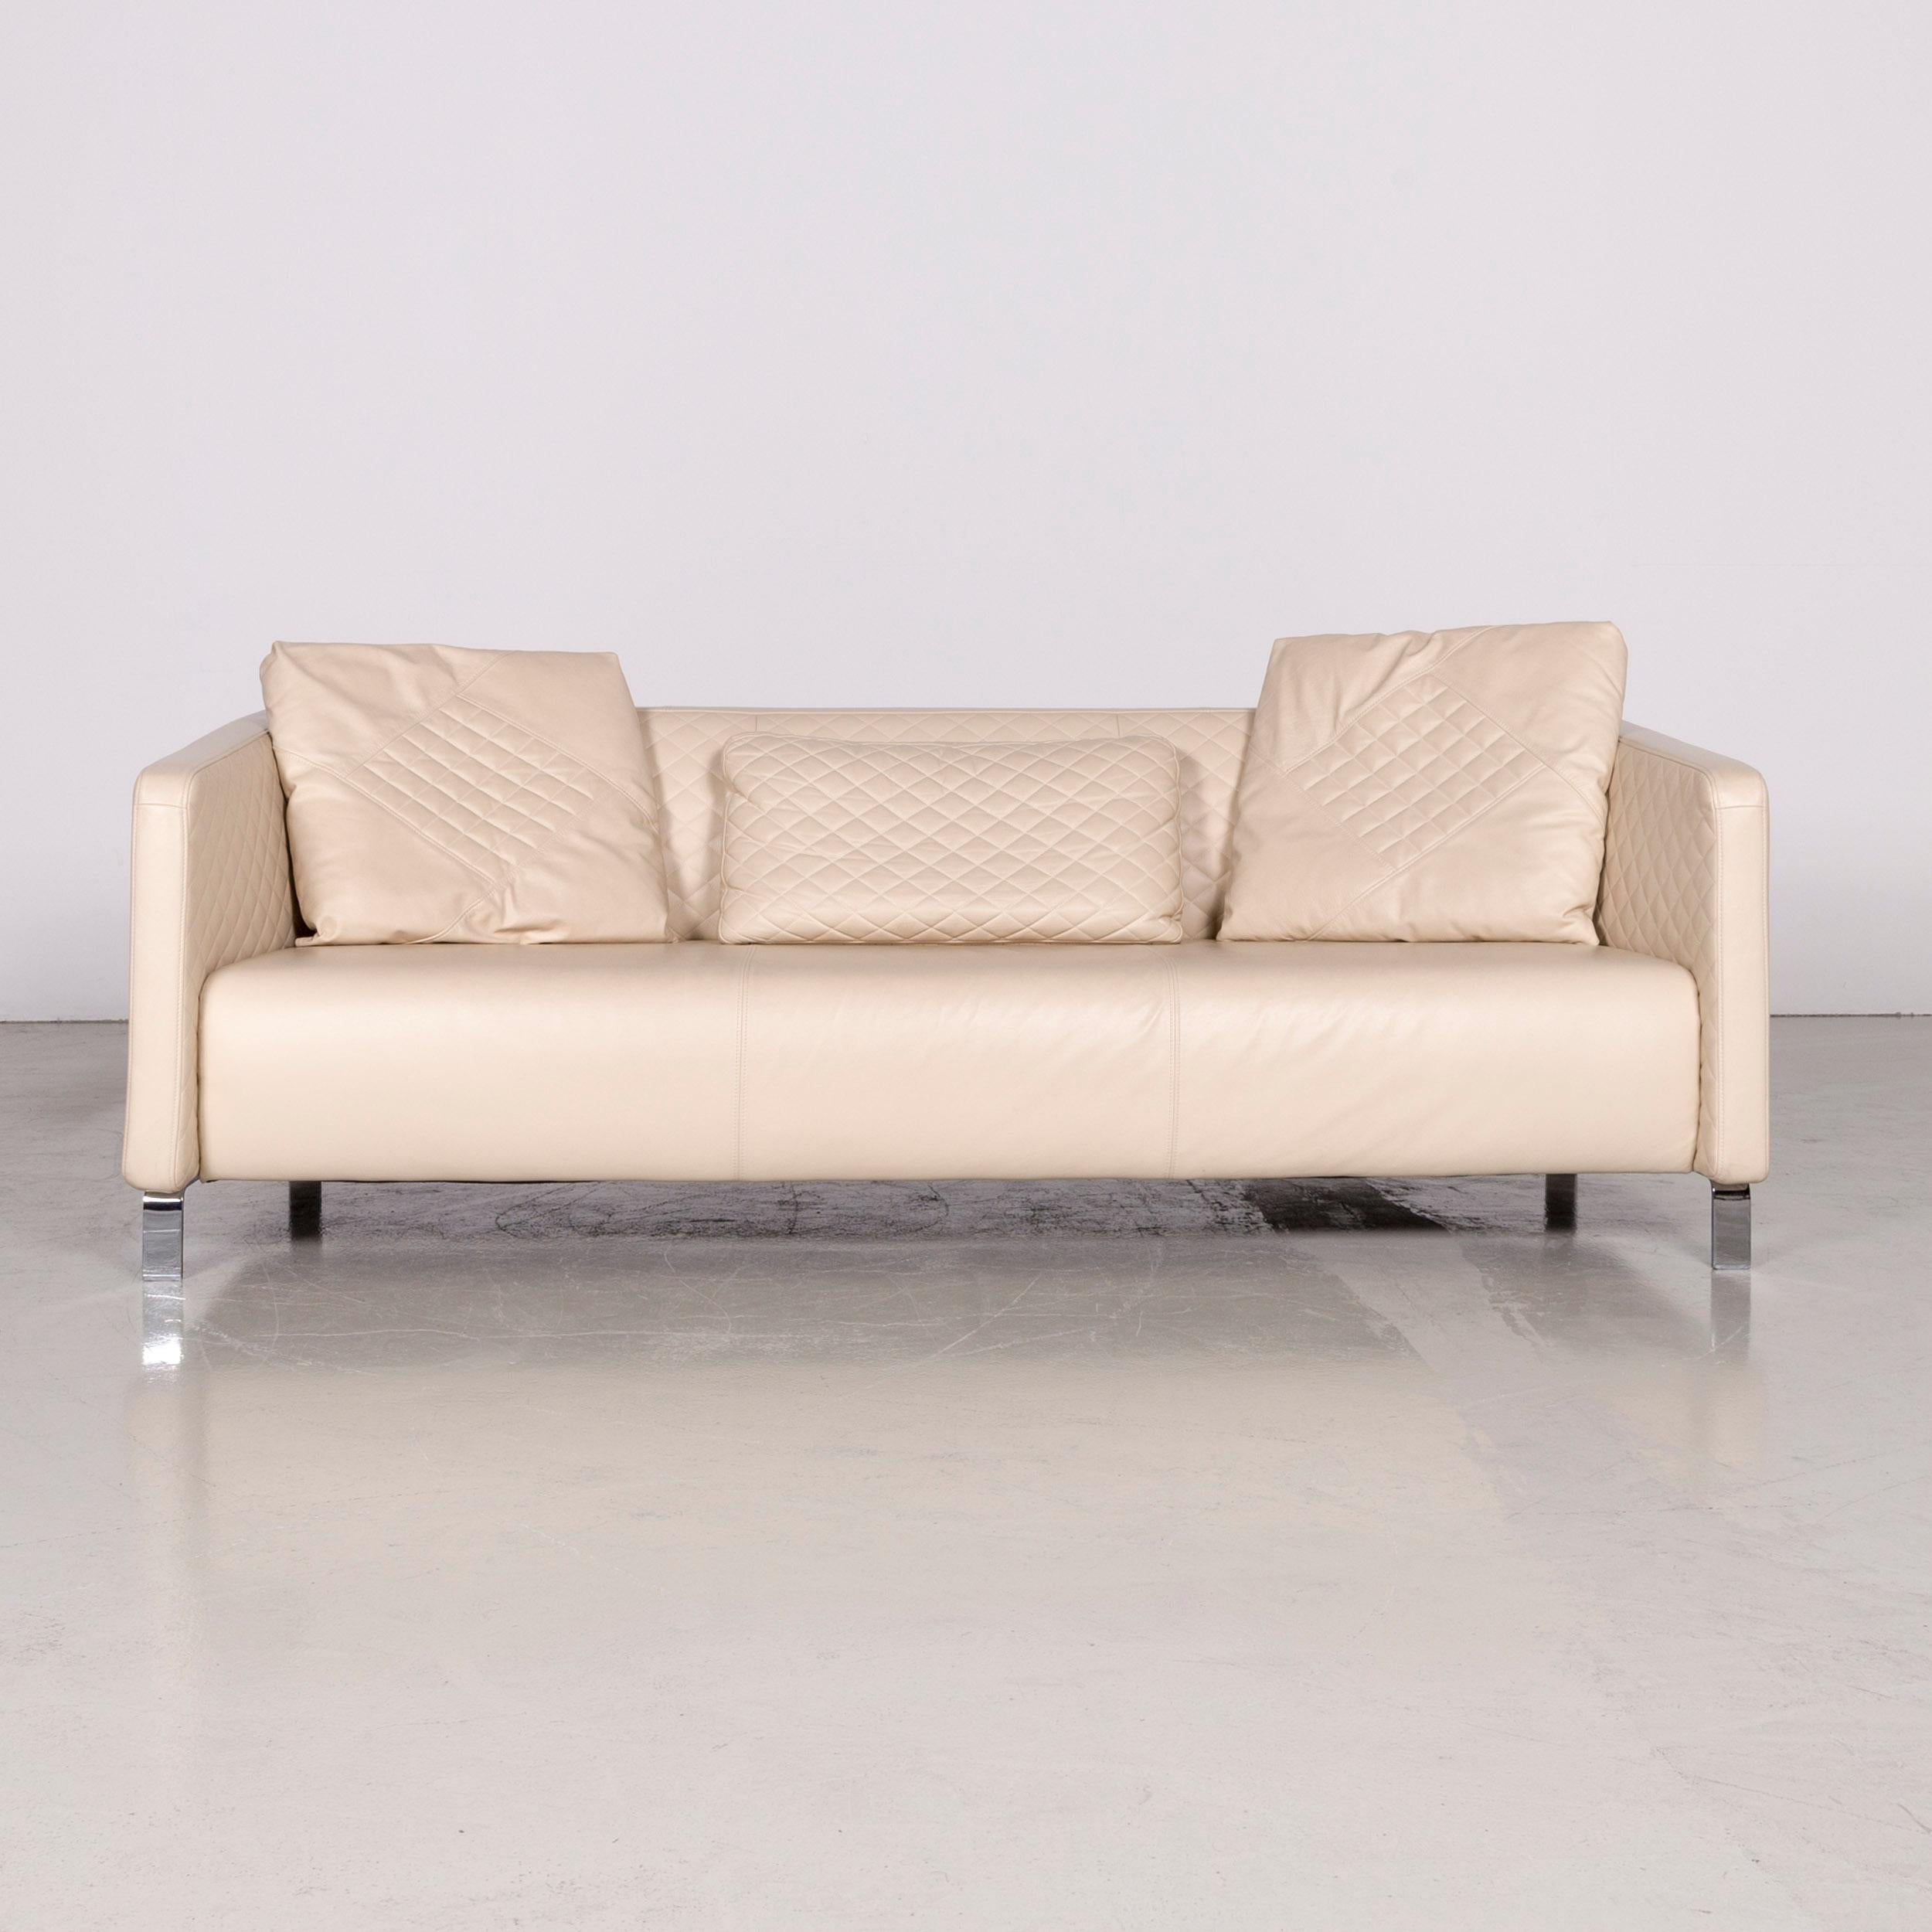 Rolf Benz 325 designer leather sofa footstool set beige three-seat couch.